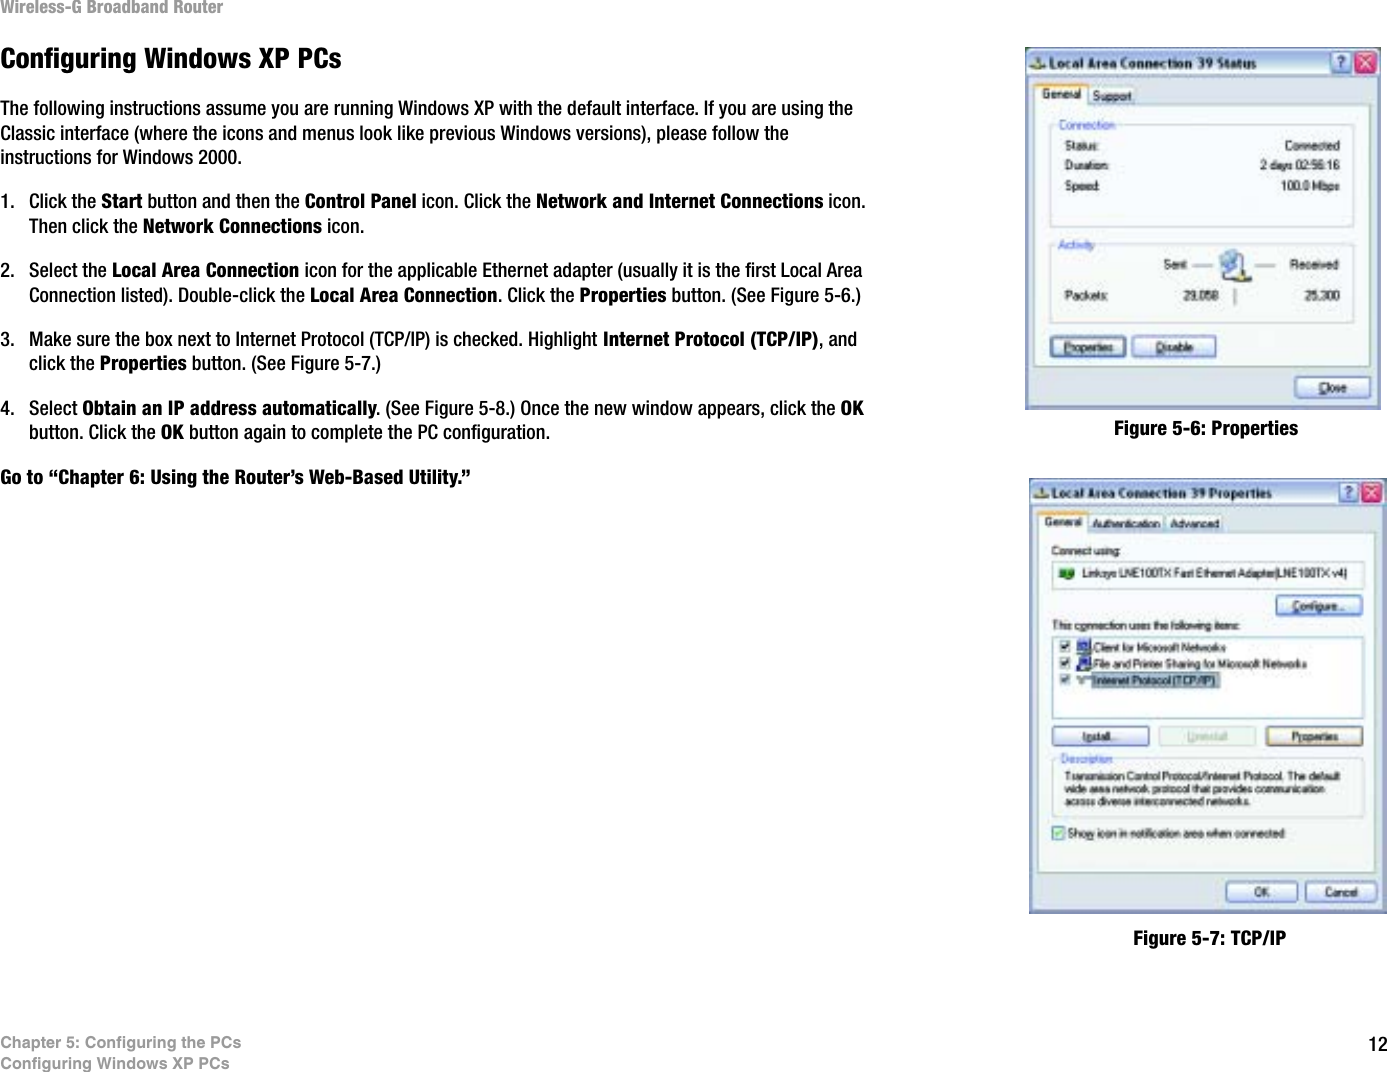 12Chapter 5: Configuring the PCsConfiguring Windows XP PCsWireless-G Broadband RouterConfiguring Windows XP PCsThe following instructions assume you are running Windows XP with the default interface. If you are using the Classic interface (where the icons and menus look like previous Windows versions), please follow the instructions for Windows 2000.1. Click the Start button and then the Control Panel icon. Click the Network and Internet Connections icon. Then click the Network Connections icon.2. Select the Local Area Connection icon for the applicable Ethernet adapter (usually it is the first Local Area Connection listed). Double-click the Local Area Connection. Click the Properties button. (See Figure 5-6.)3. Make sure the box next to Internet Protocol (TCP/IP) is checked. Highlight Internet Protocol (TCP/IP), and click the Properties button. (See Figure 5-7.)4. Select Obtain an IP address automatically. (See Figure 5-8.) Once the new window appears, click the OKbutton. Click the OK button again to complete the PC configuration.Go to “Chapter 6: Using the Router’s Web-Based Utility.”Figure 5-6: PropertiesFigure 5-7: TCP/IP